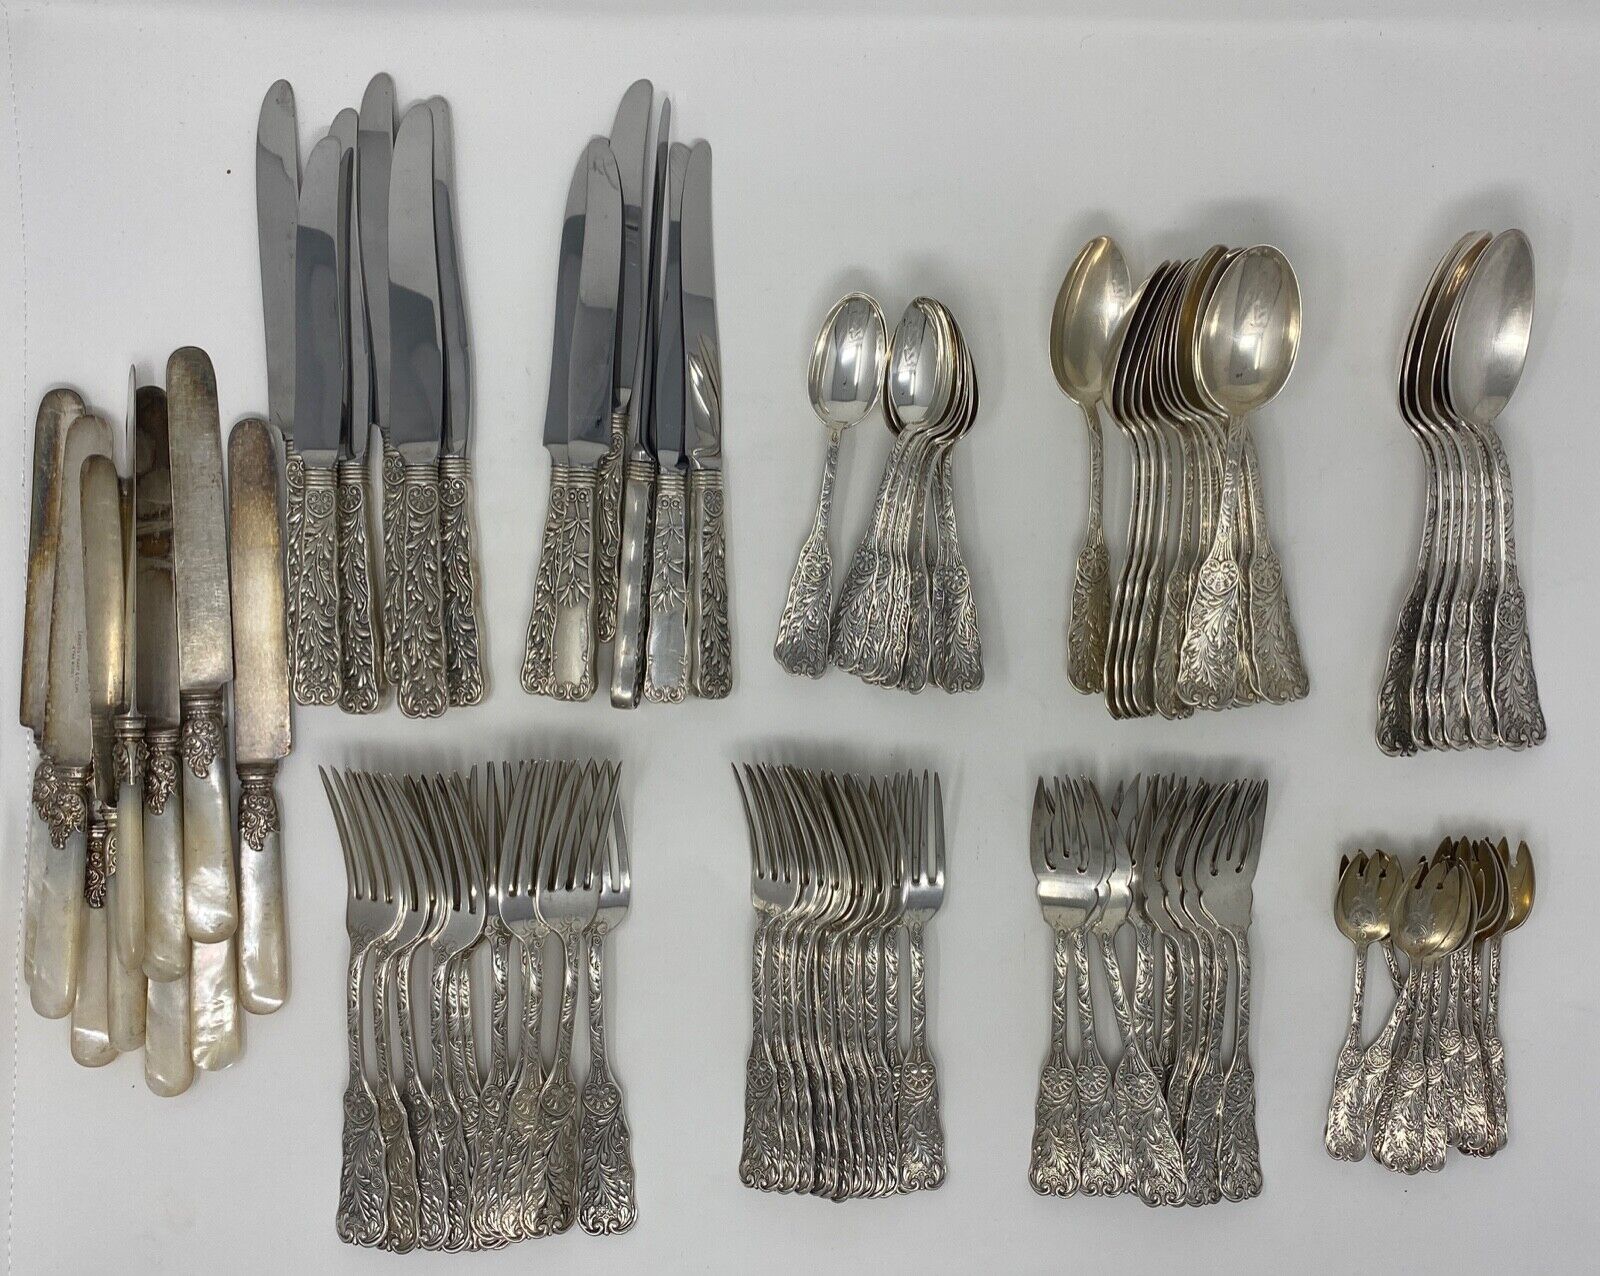 Set of Gorham St Cloud1885 flatware with mother of pearl handled knives 96 pcs